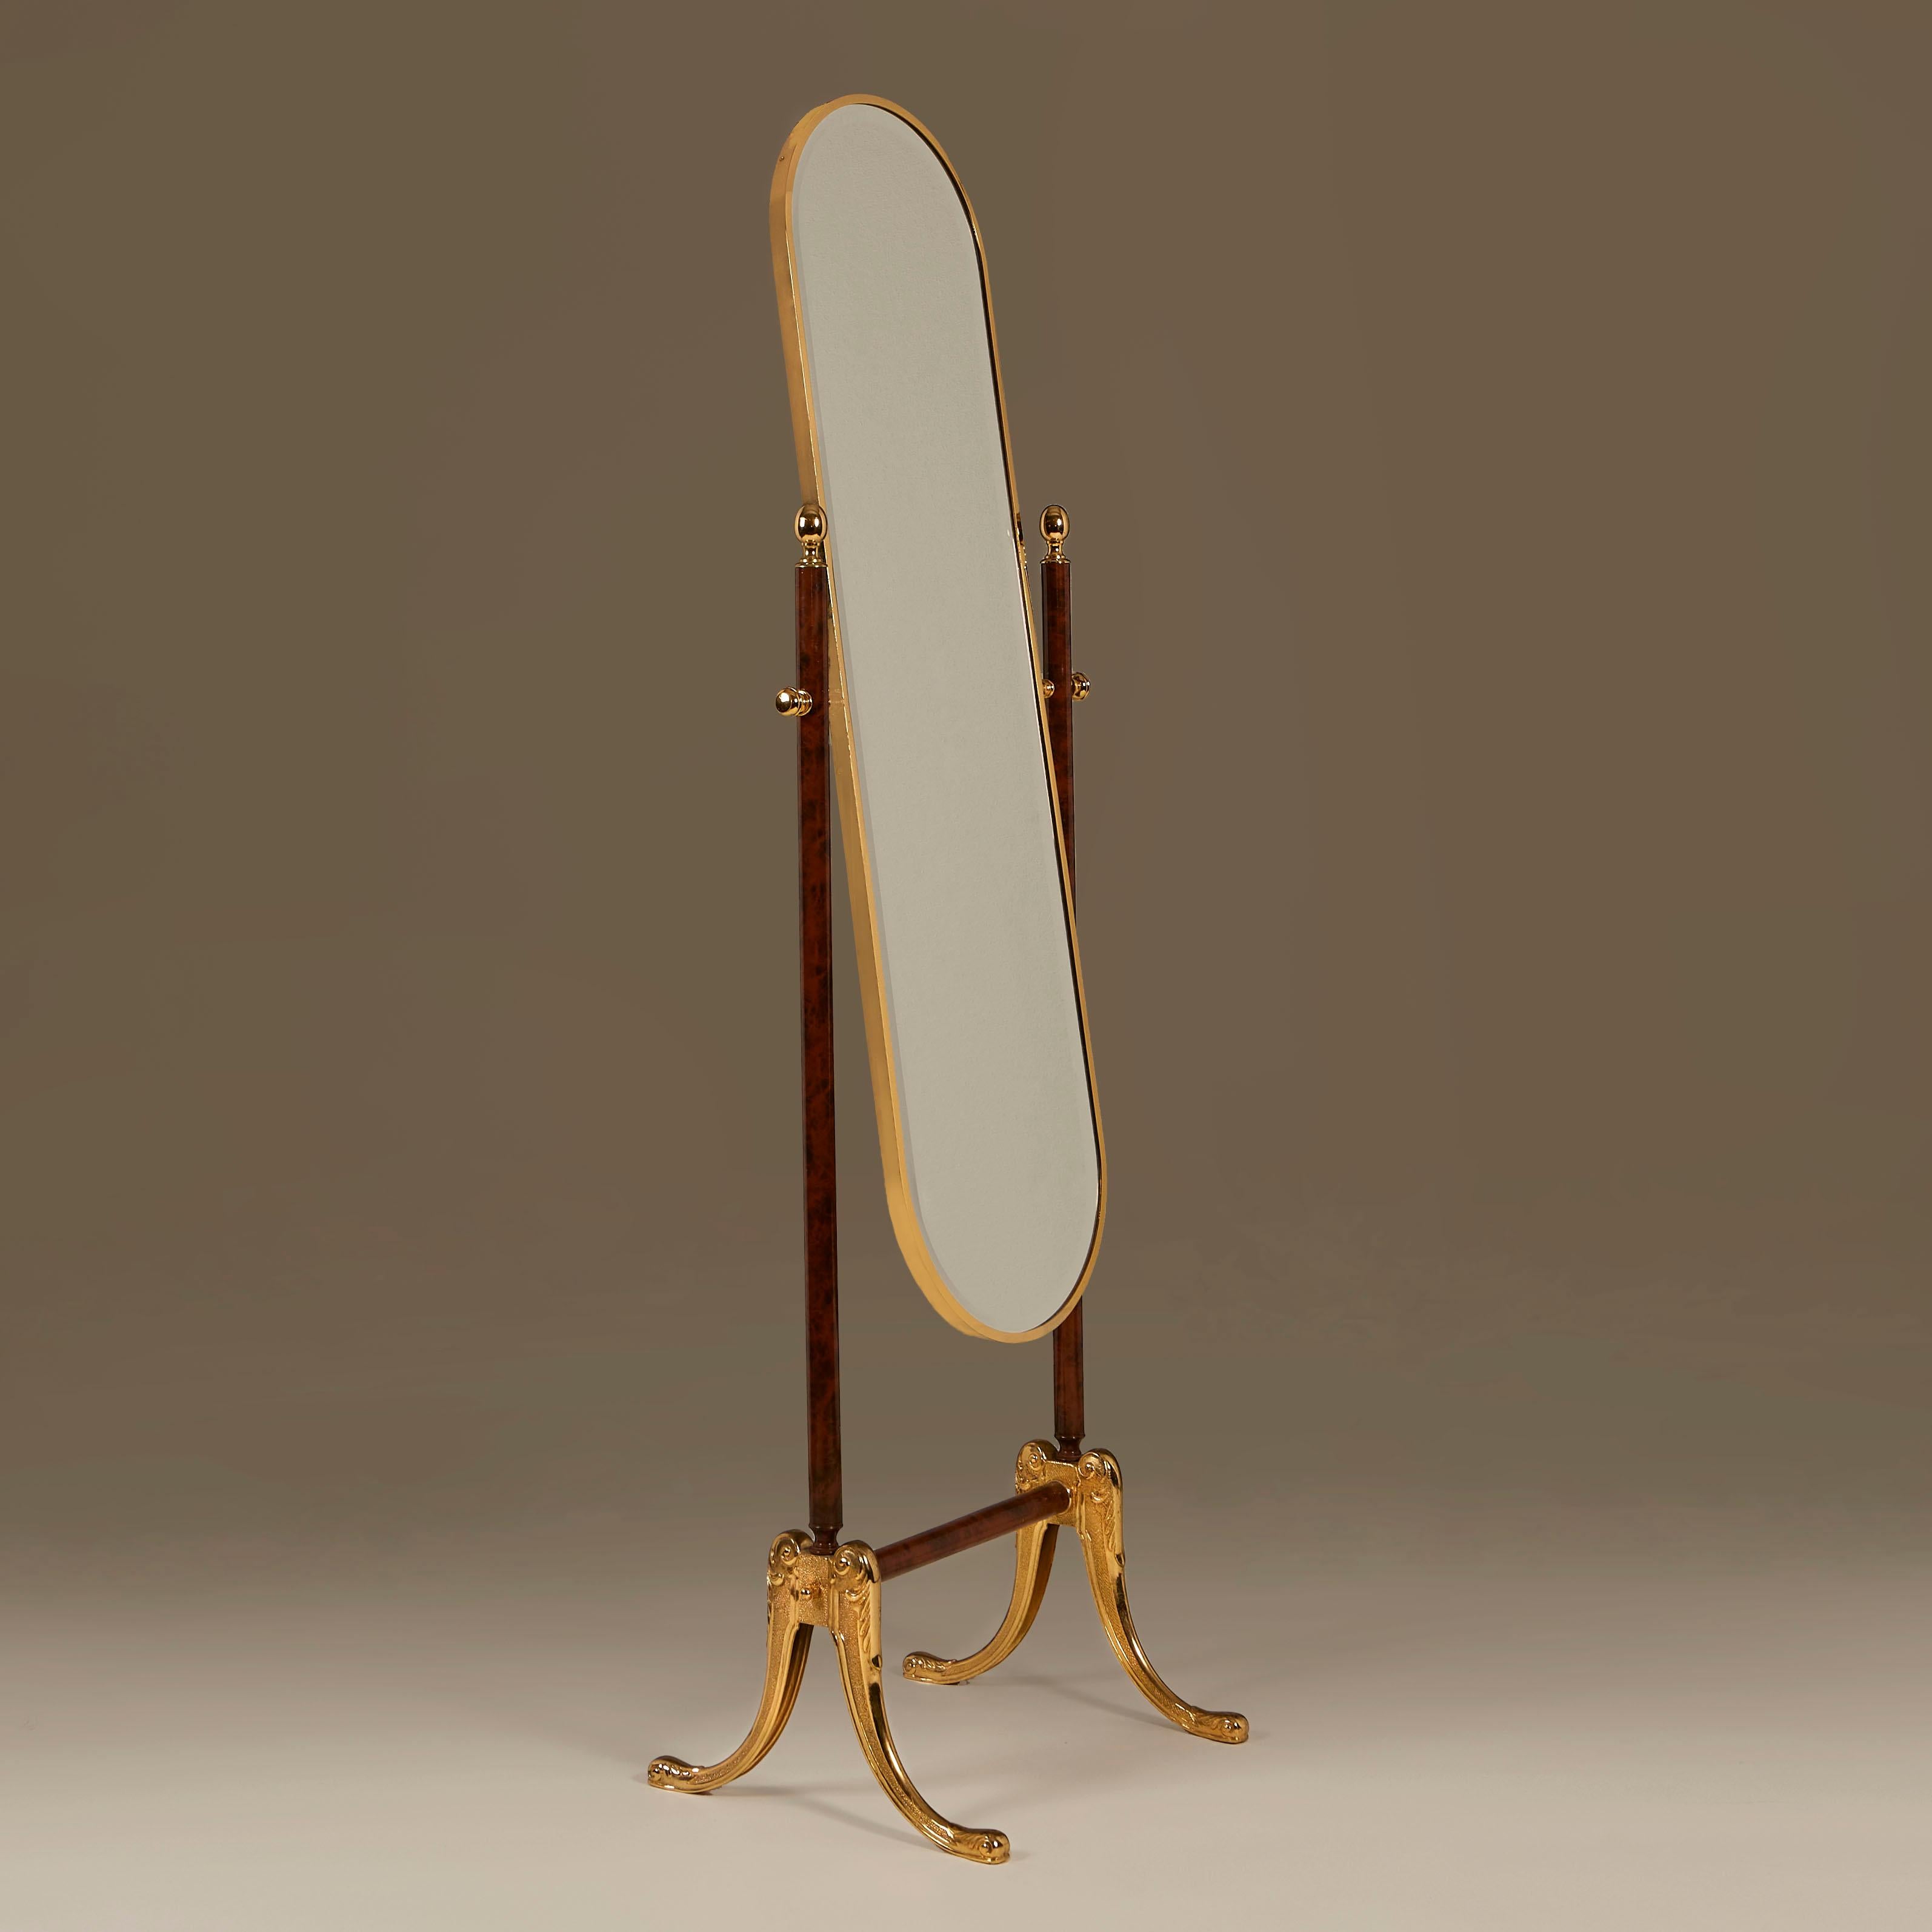 Chic dark faux wood and lacquered brass full-length adjustable bevelled glass mirror with intricately-detailed cast brass splayed legs (see detailed image).